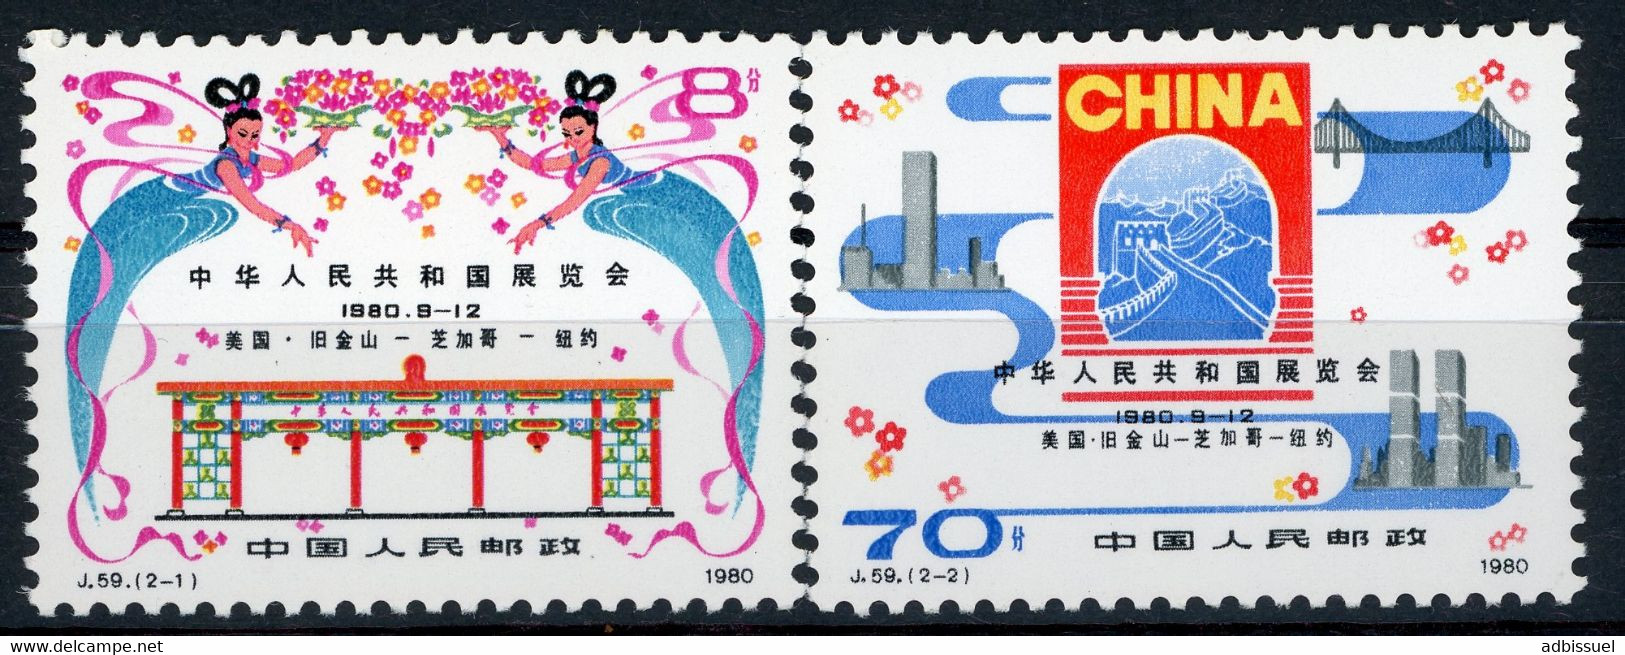 CHINA CHINE 1980 N° 2366 + 2367. Value (cote) 23 € MNH. VG/TB. Chinese Trade Show (Exposition Commerciale Chinoise) - Unused Stamps